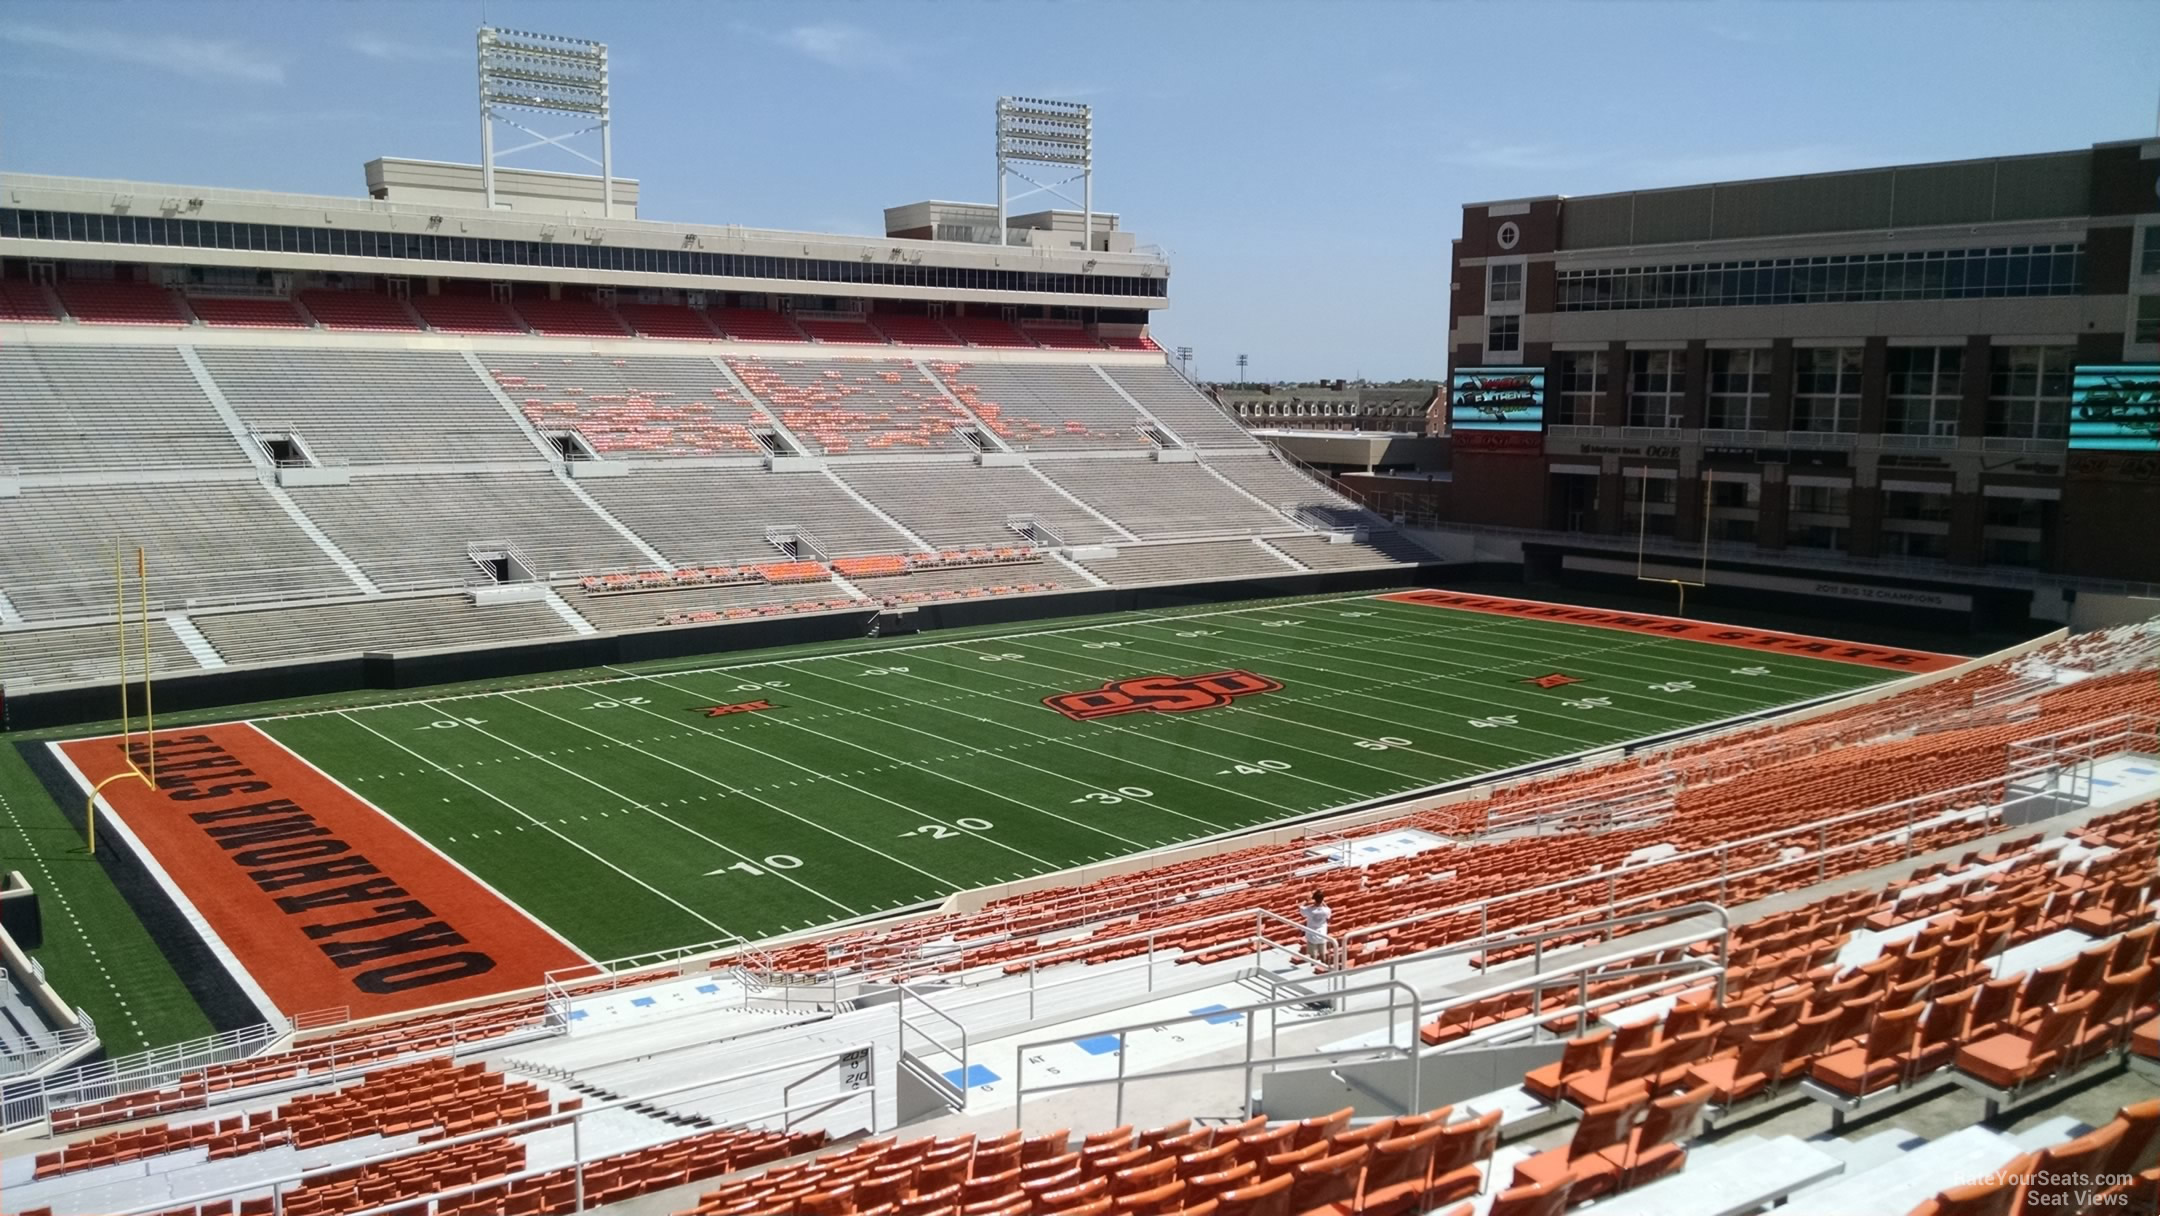 section 310, row 19 seat view  - boone pickens stadium